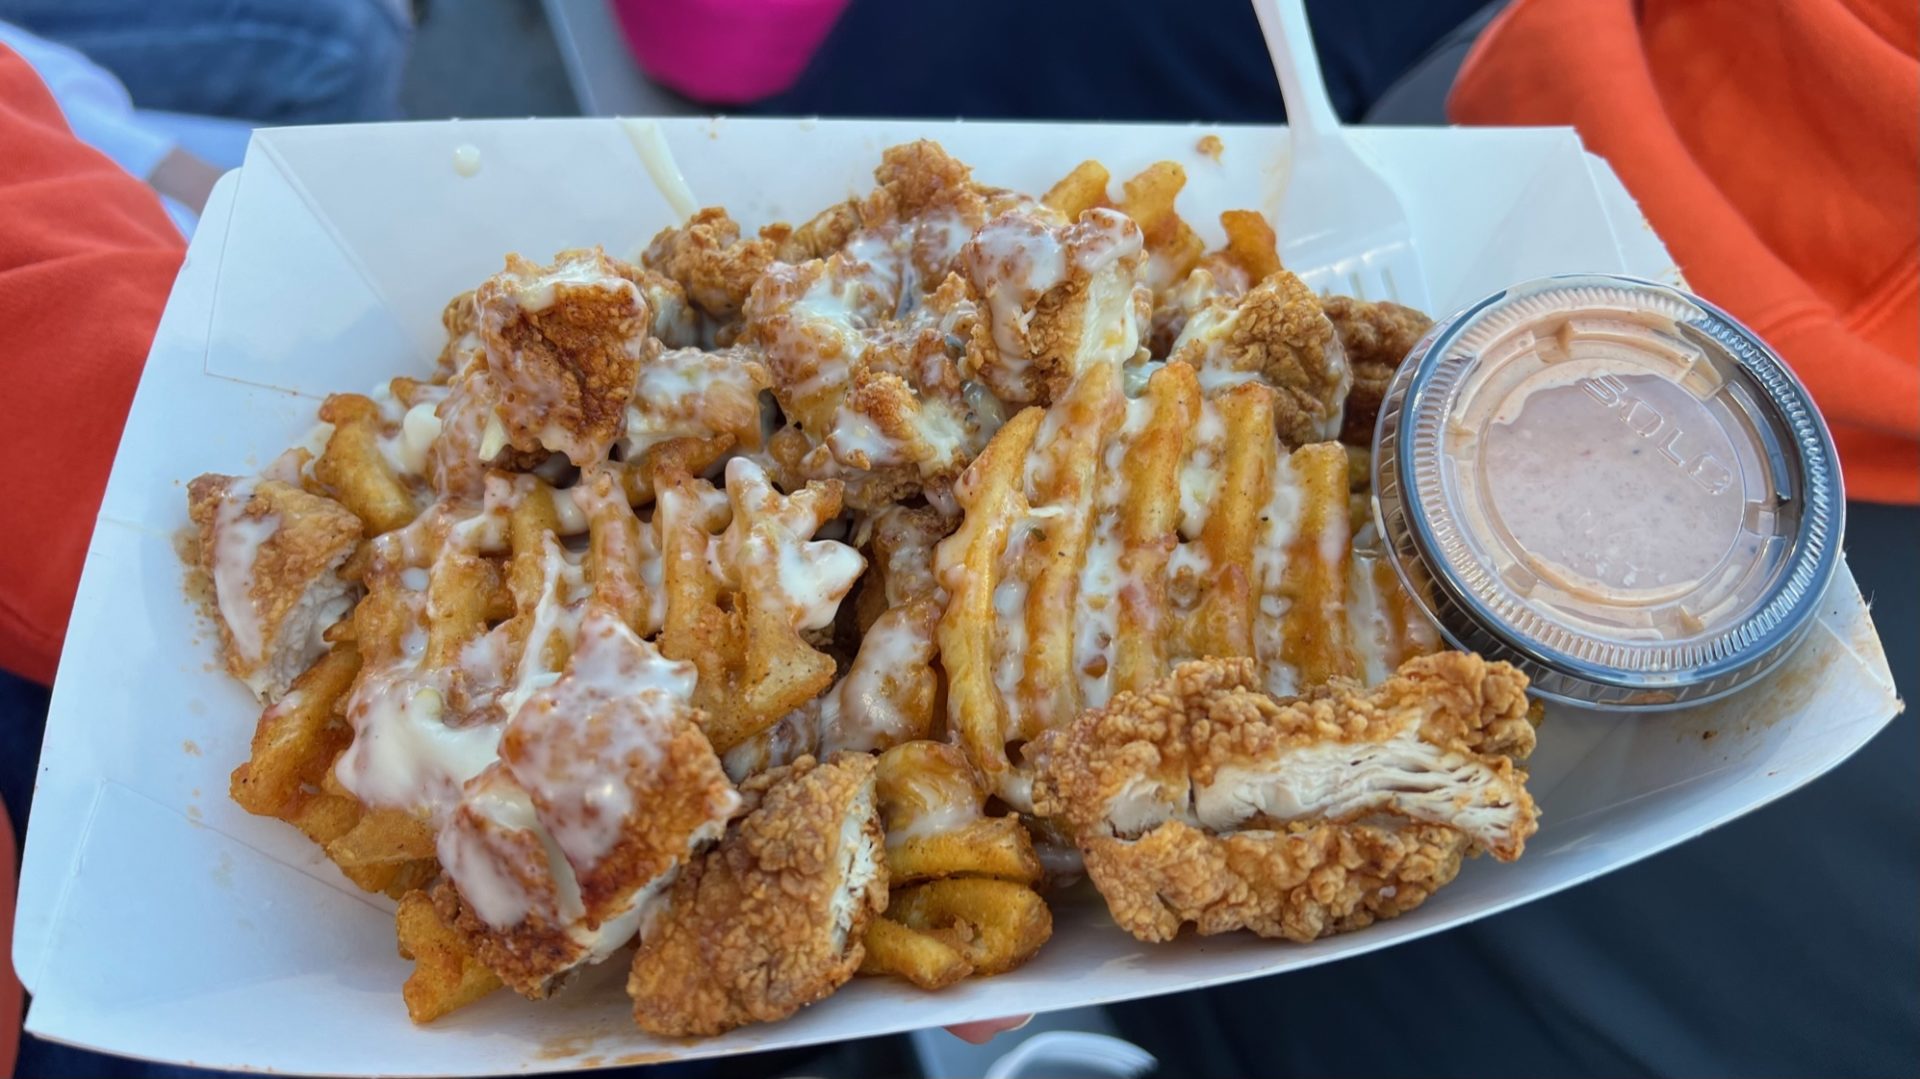 A rectanguler paper tray filled with waffle fries, chunks of breaded chicken, and covered in a white sauce.